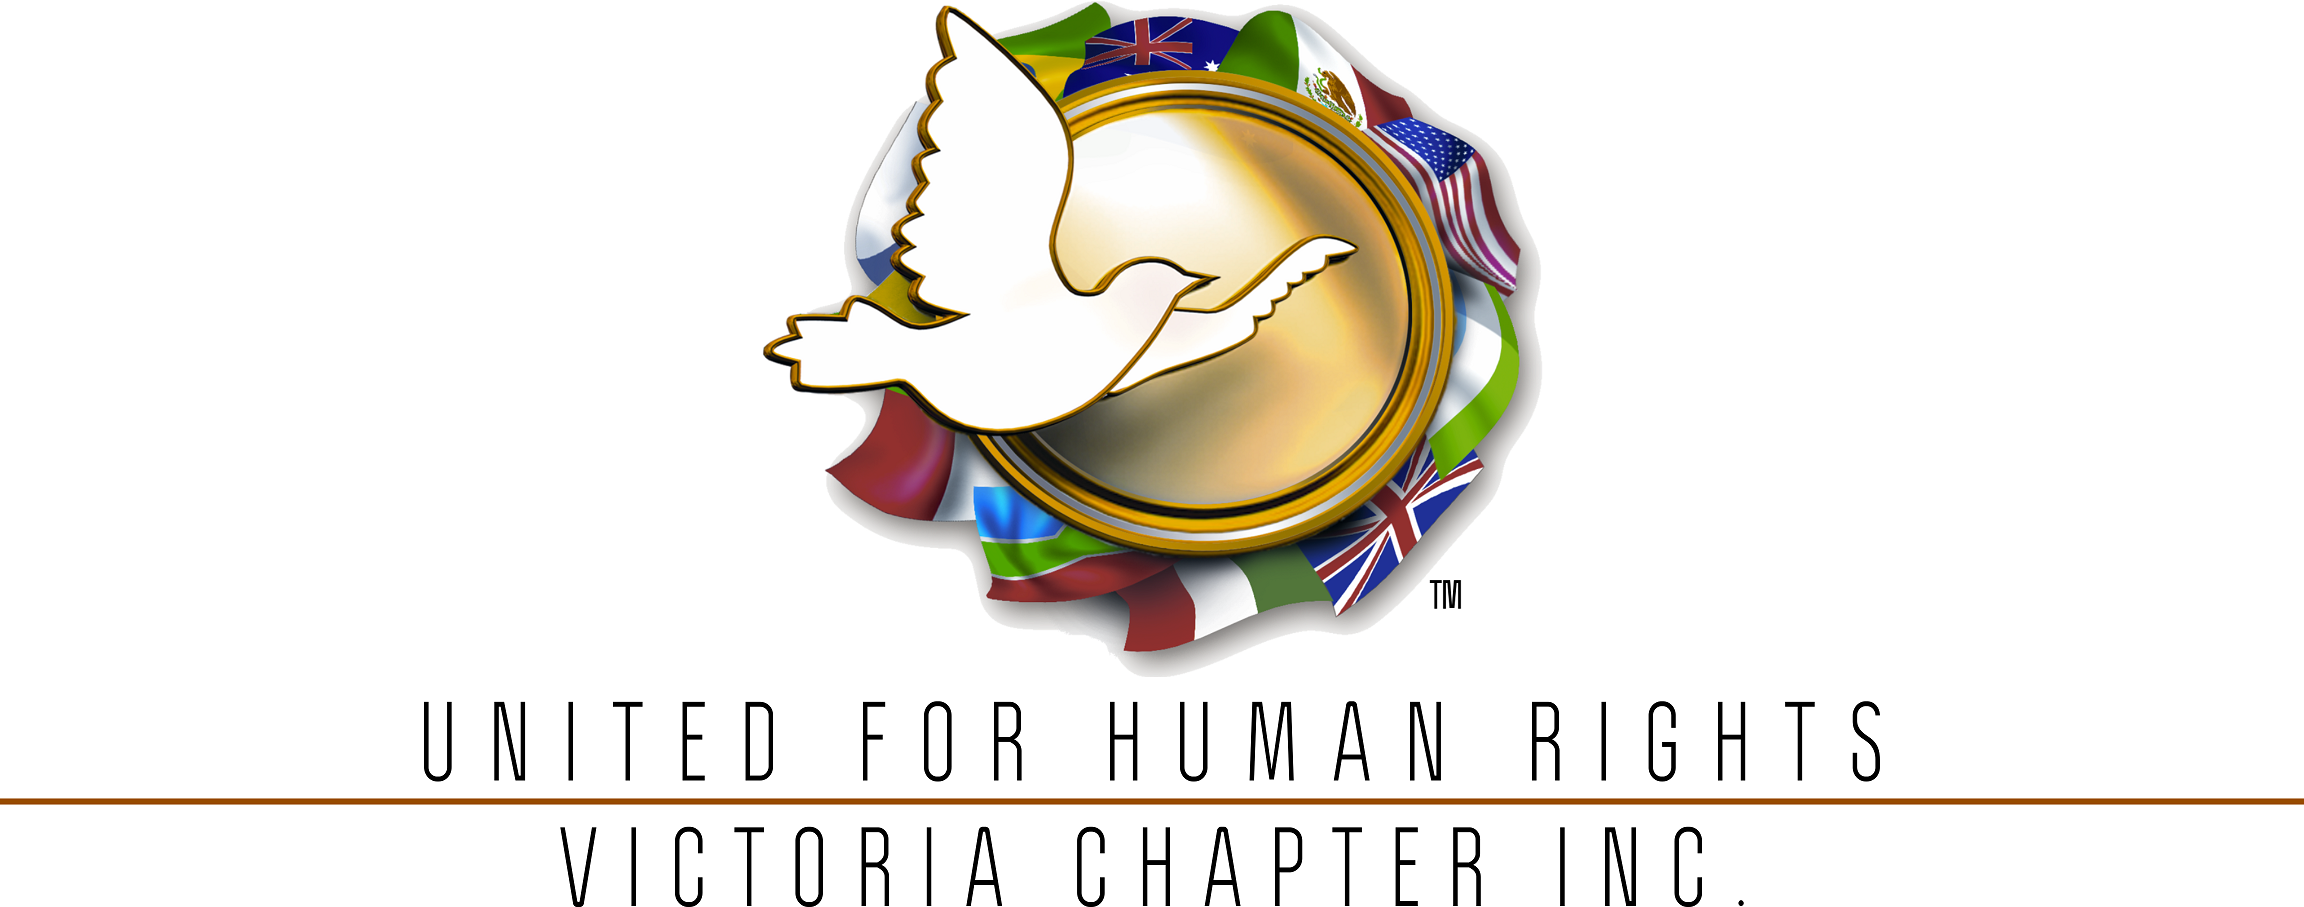 United For Human Rights (Victoria Chapter) logo